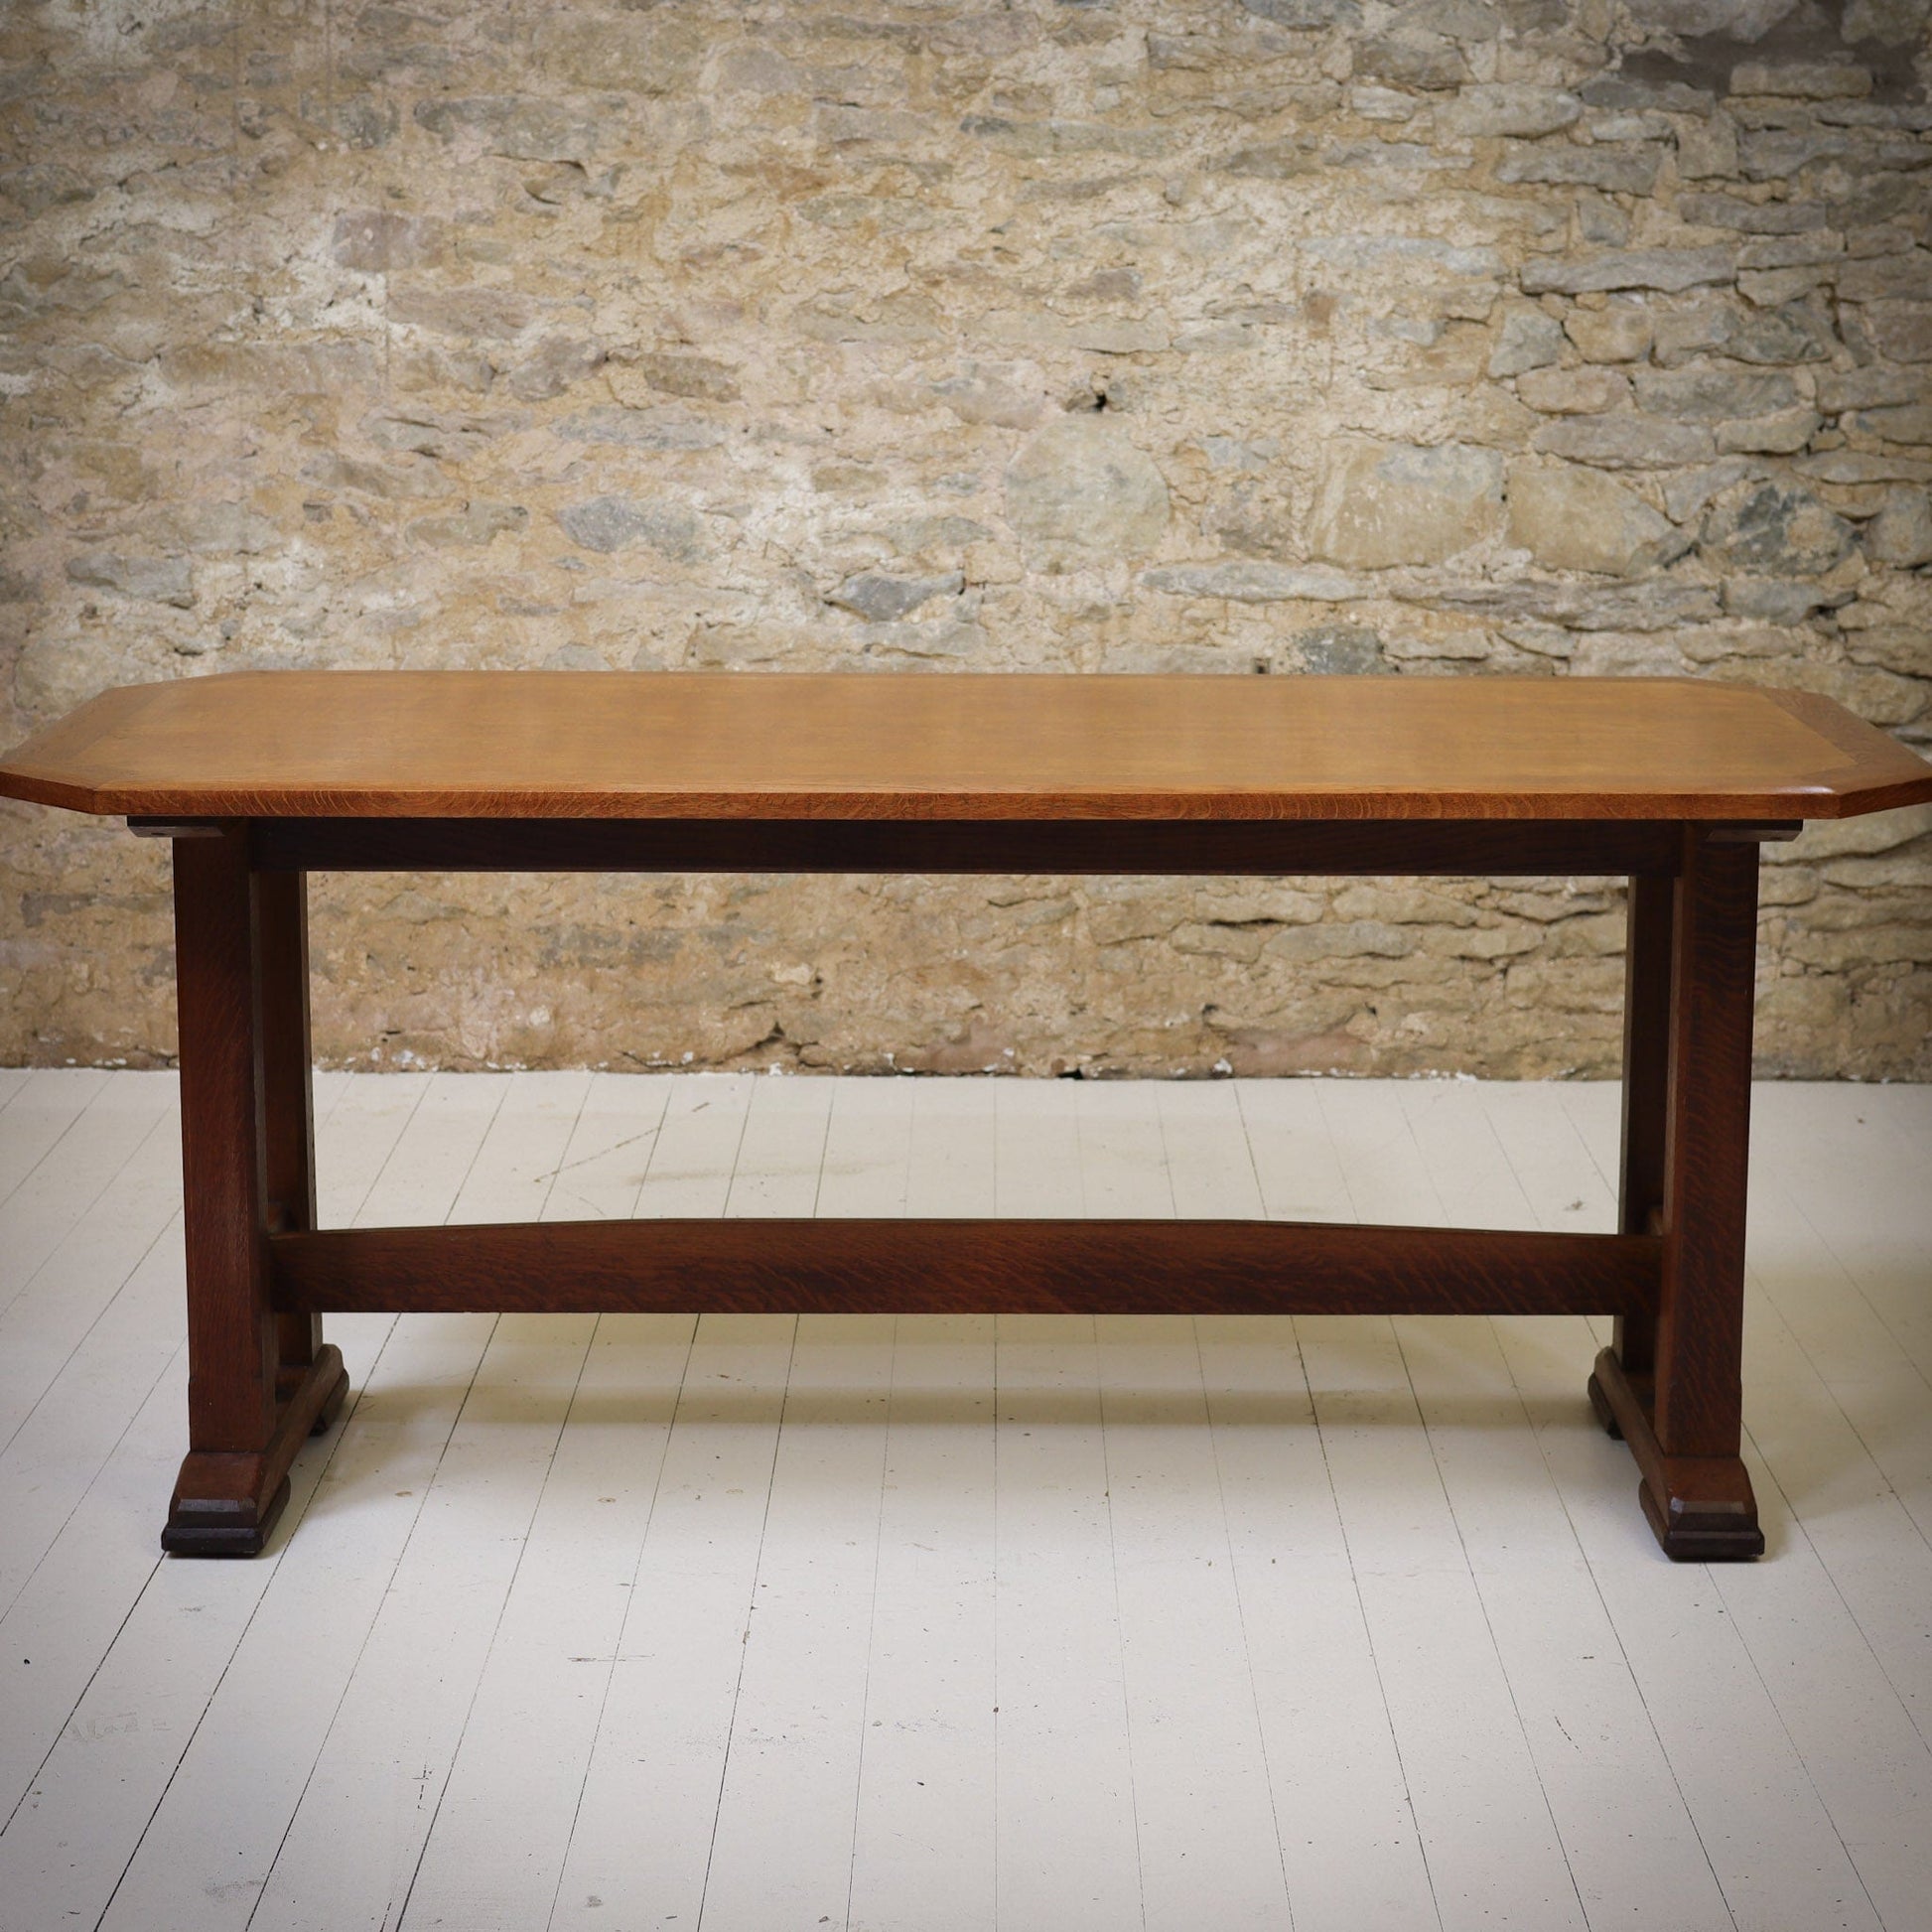 Brynmawr Furniture Company  Arts & Crafts Cotswold School Oak Dining Table